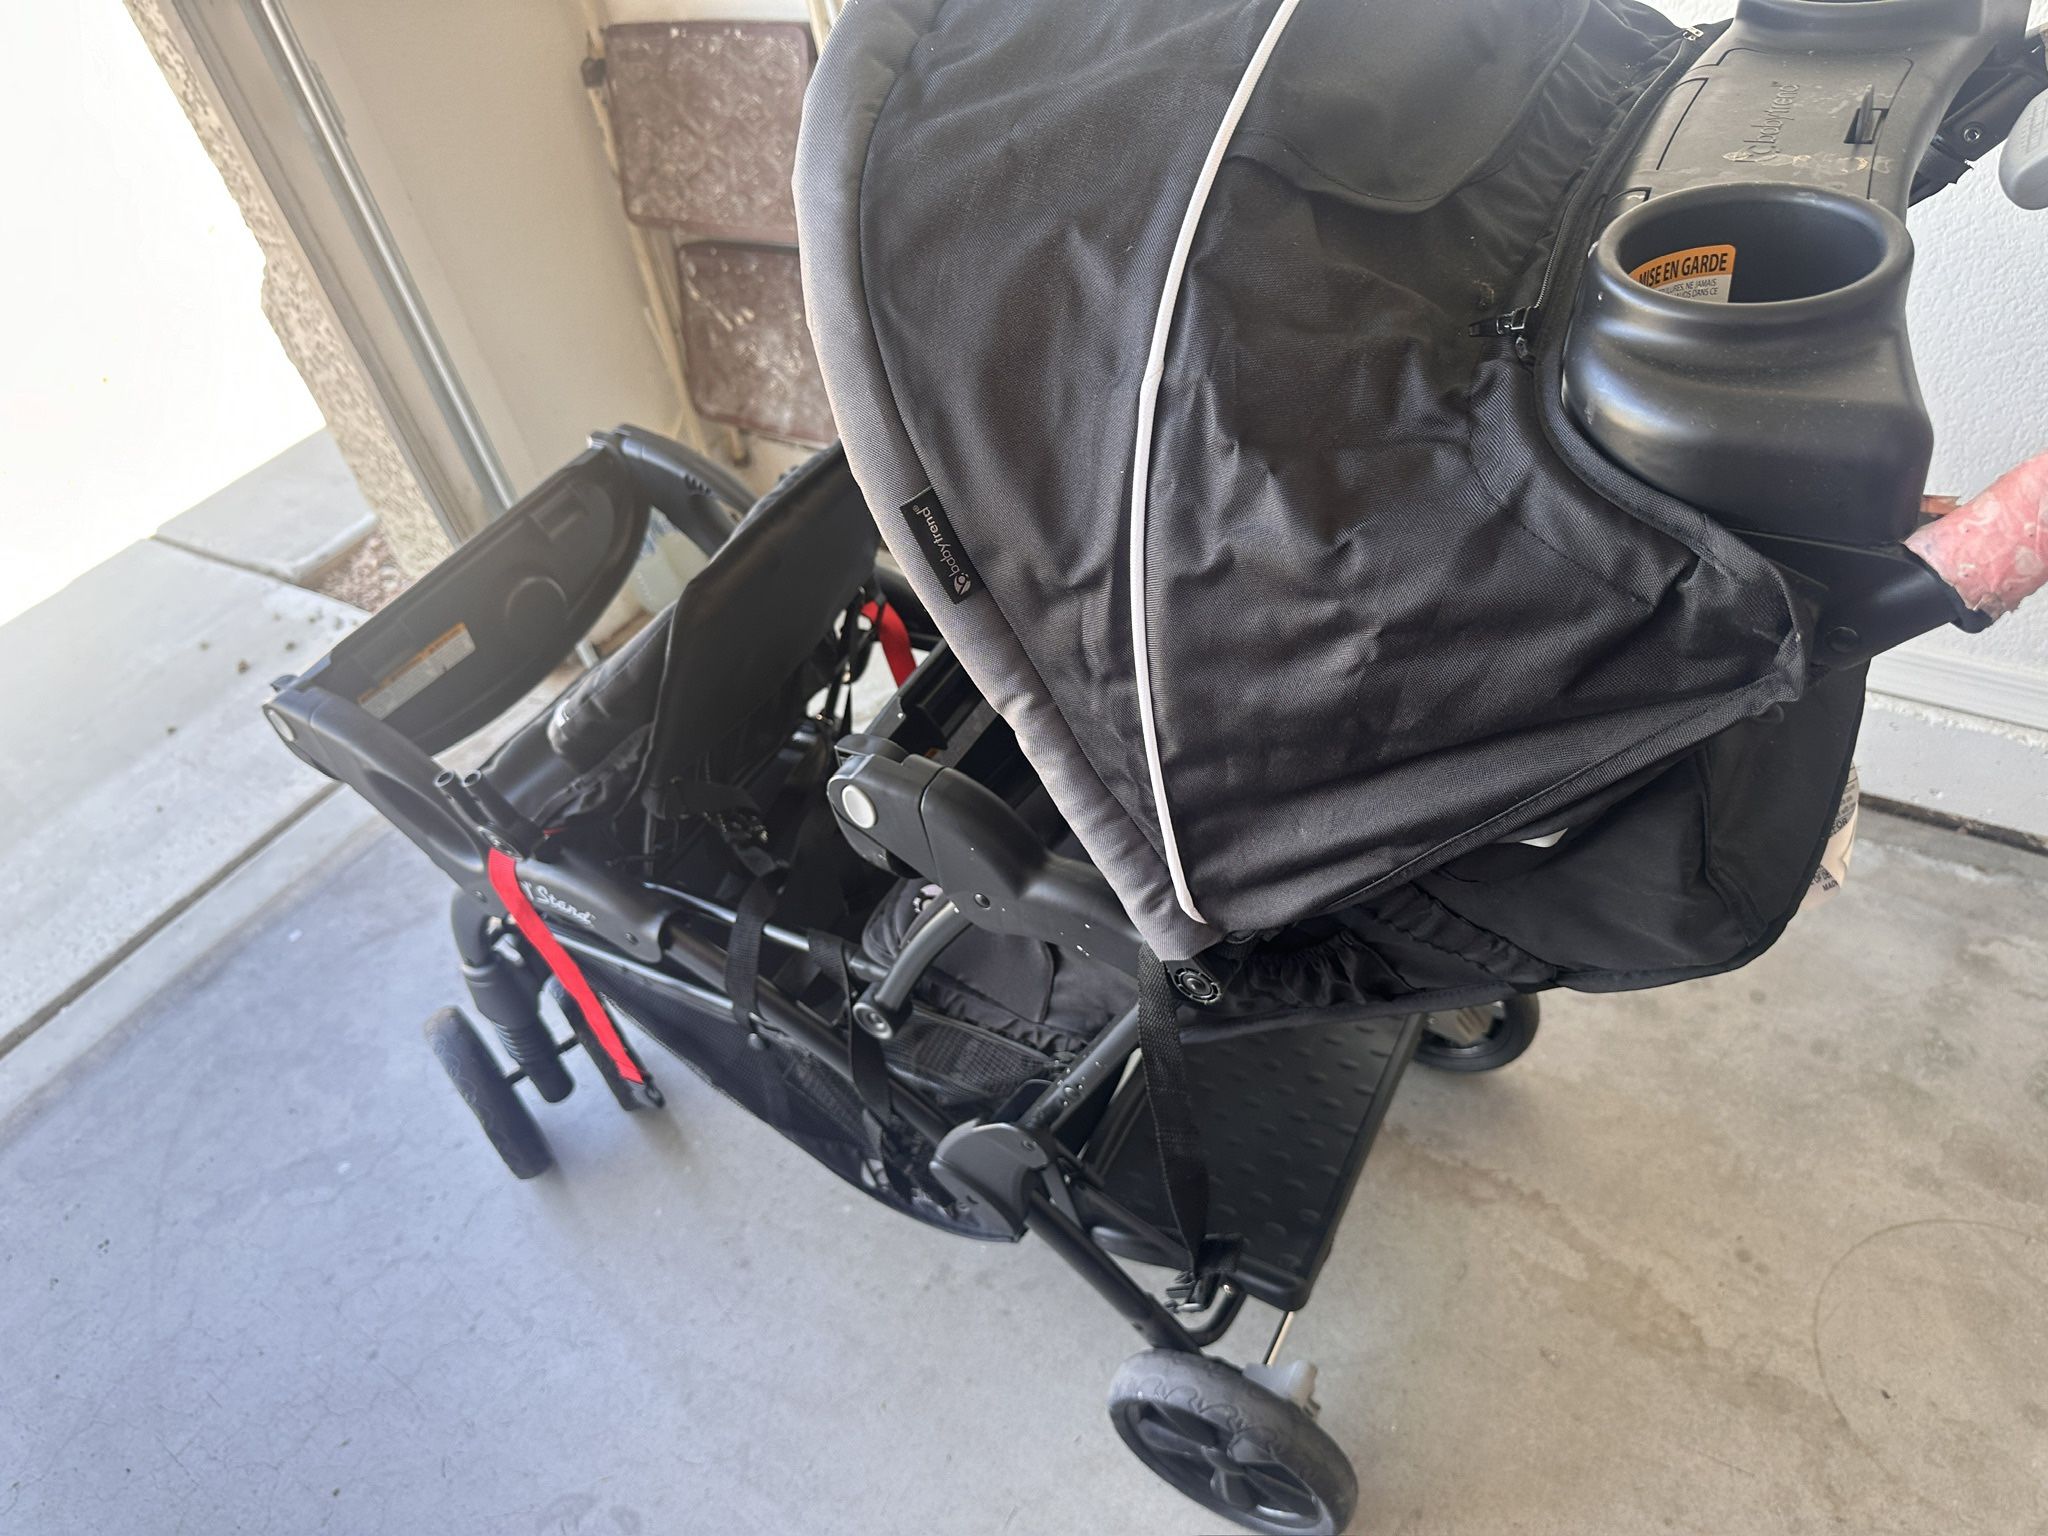 Twins Double Stroller 